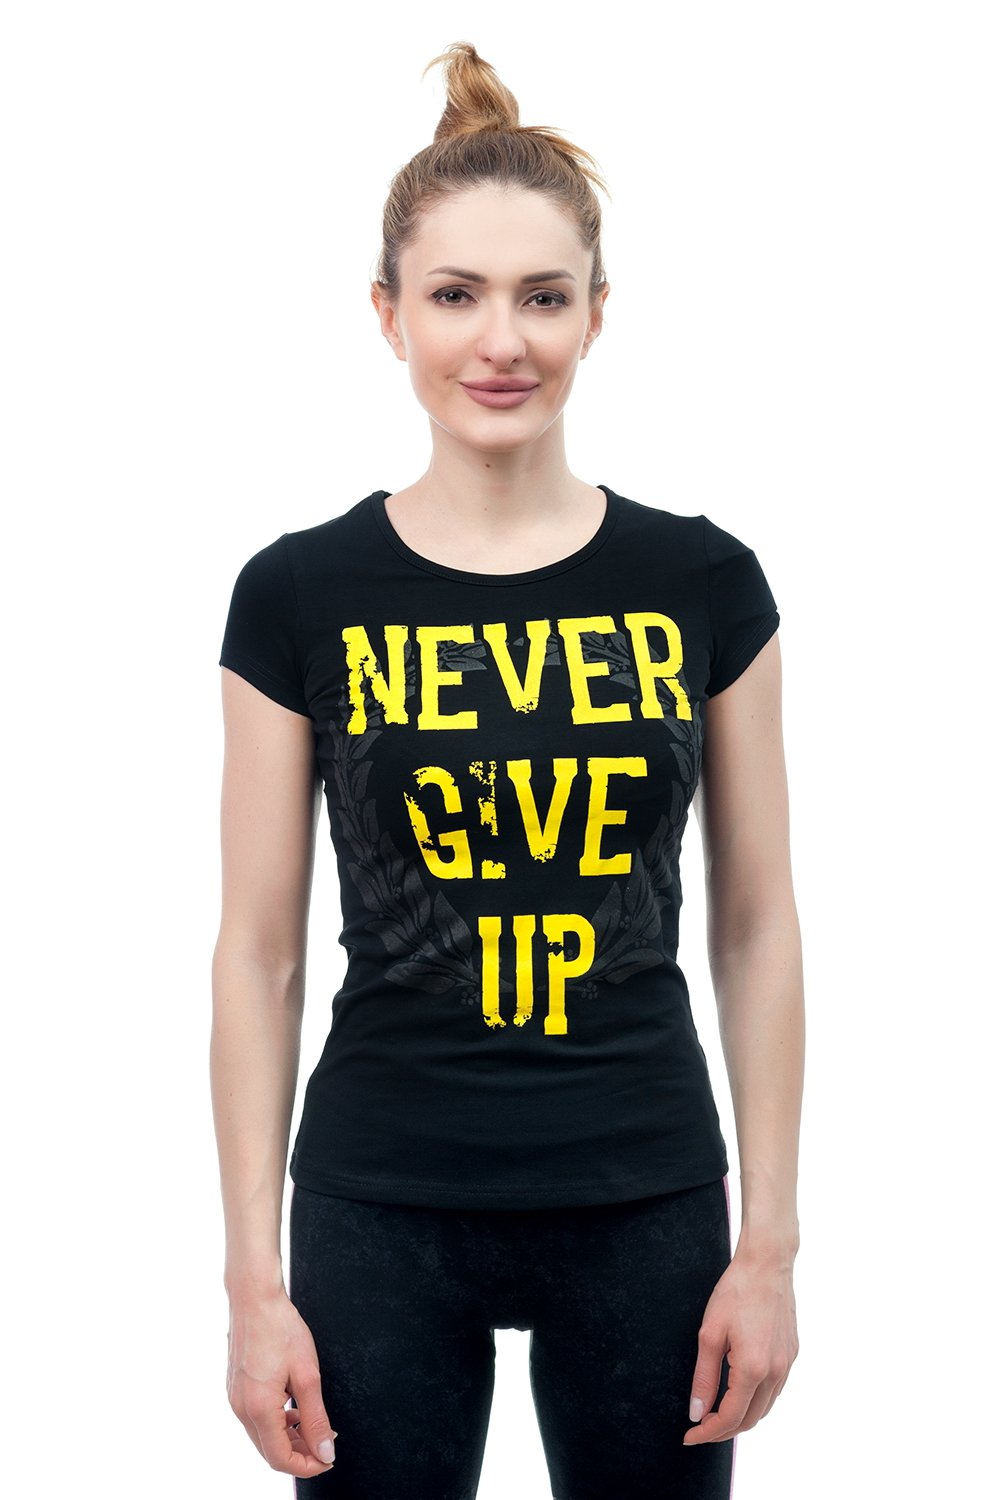 Women's T-shirt Never give up, black, size XS